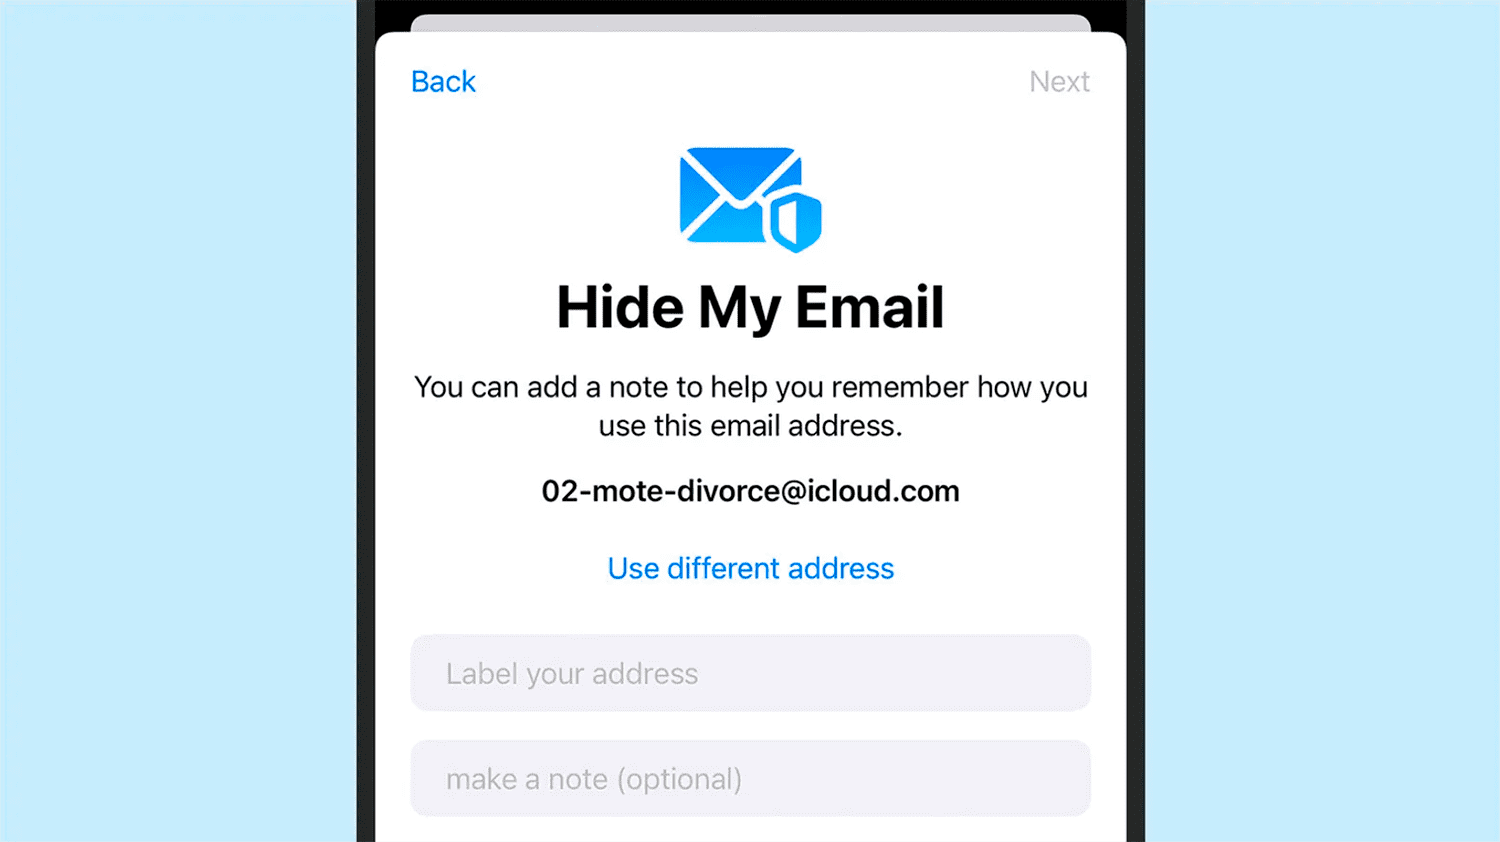 iCloud Mail’s Hide My Email feature